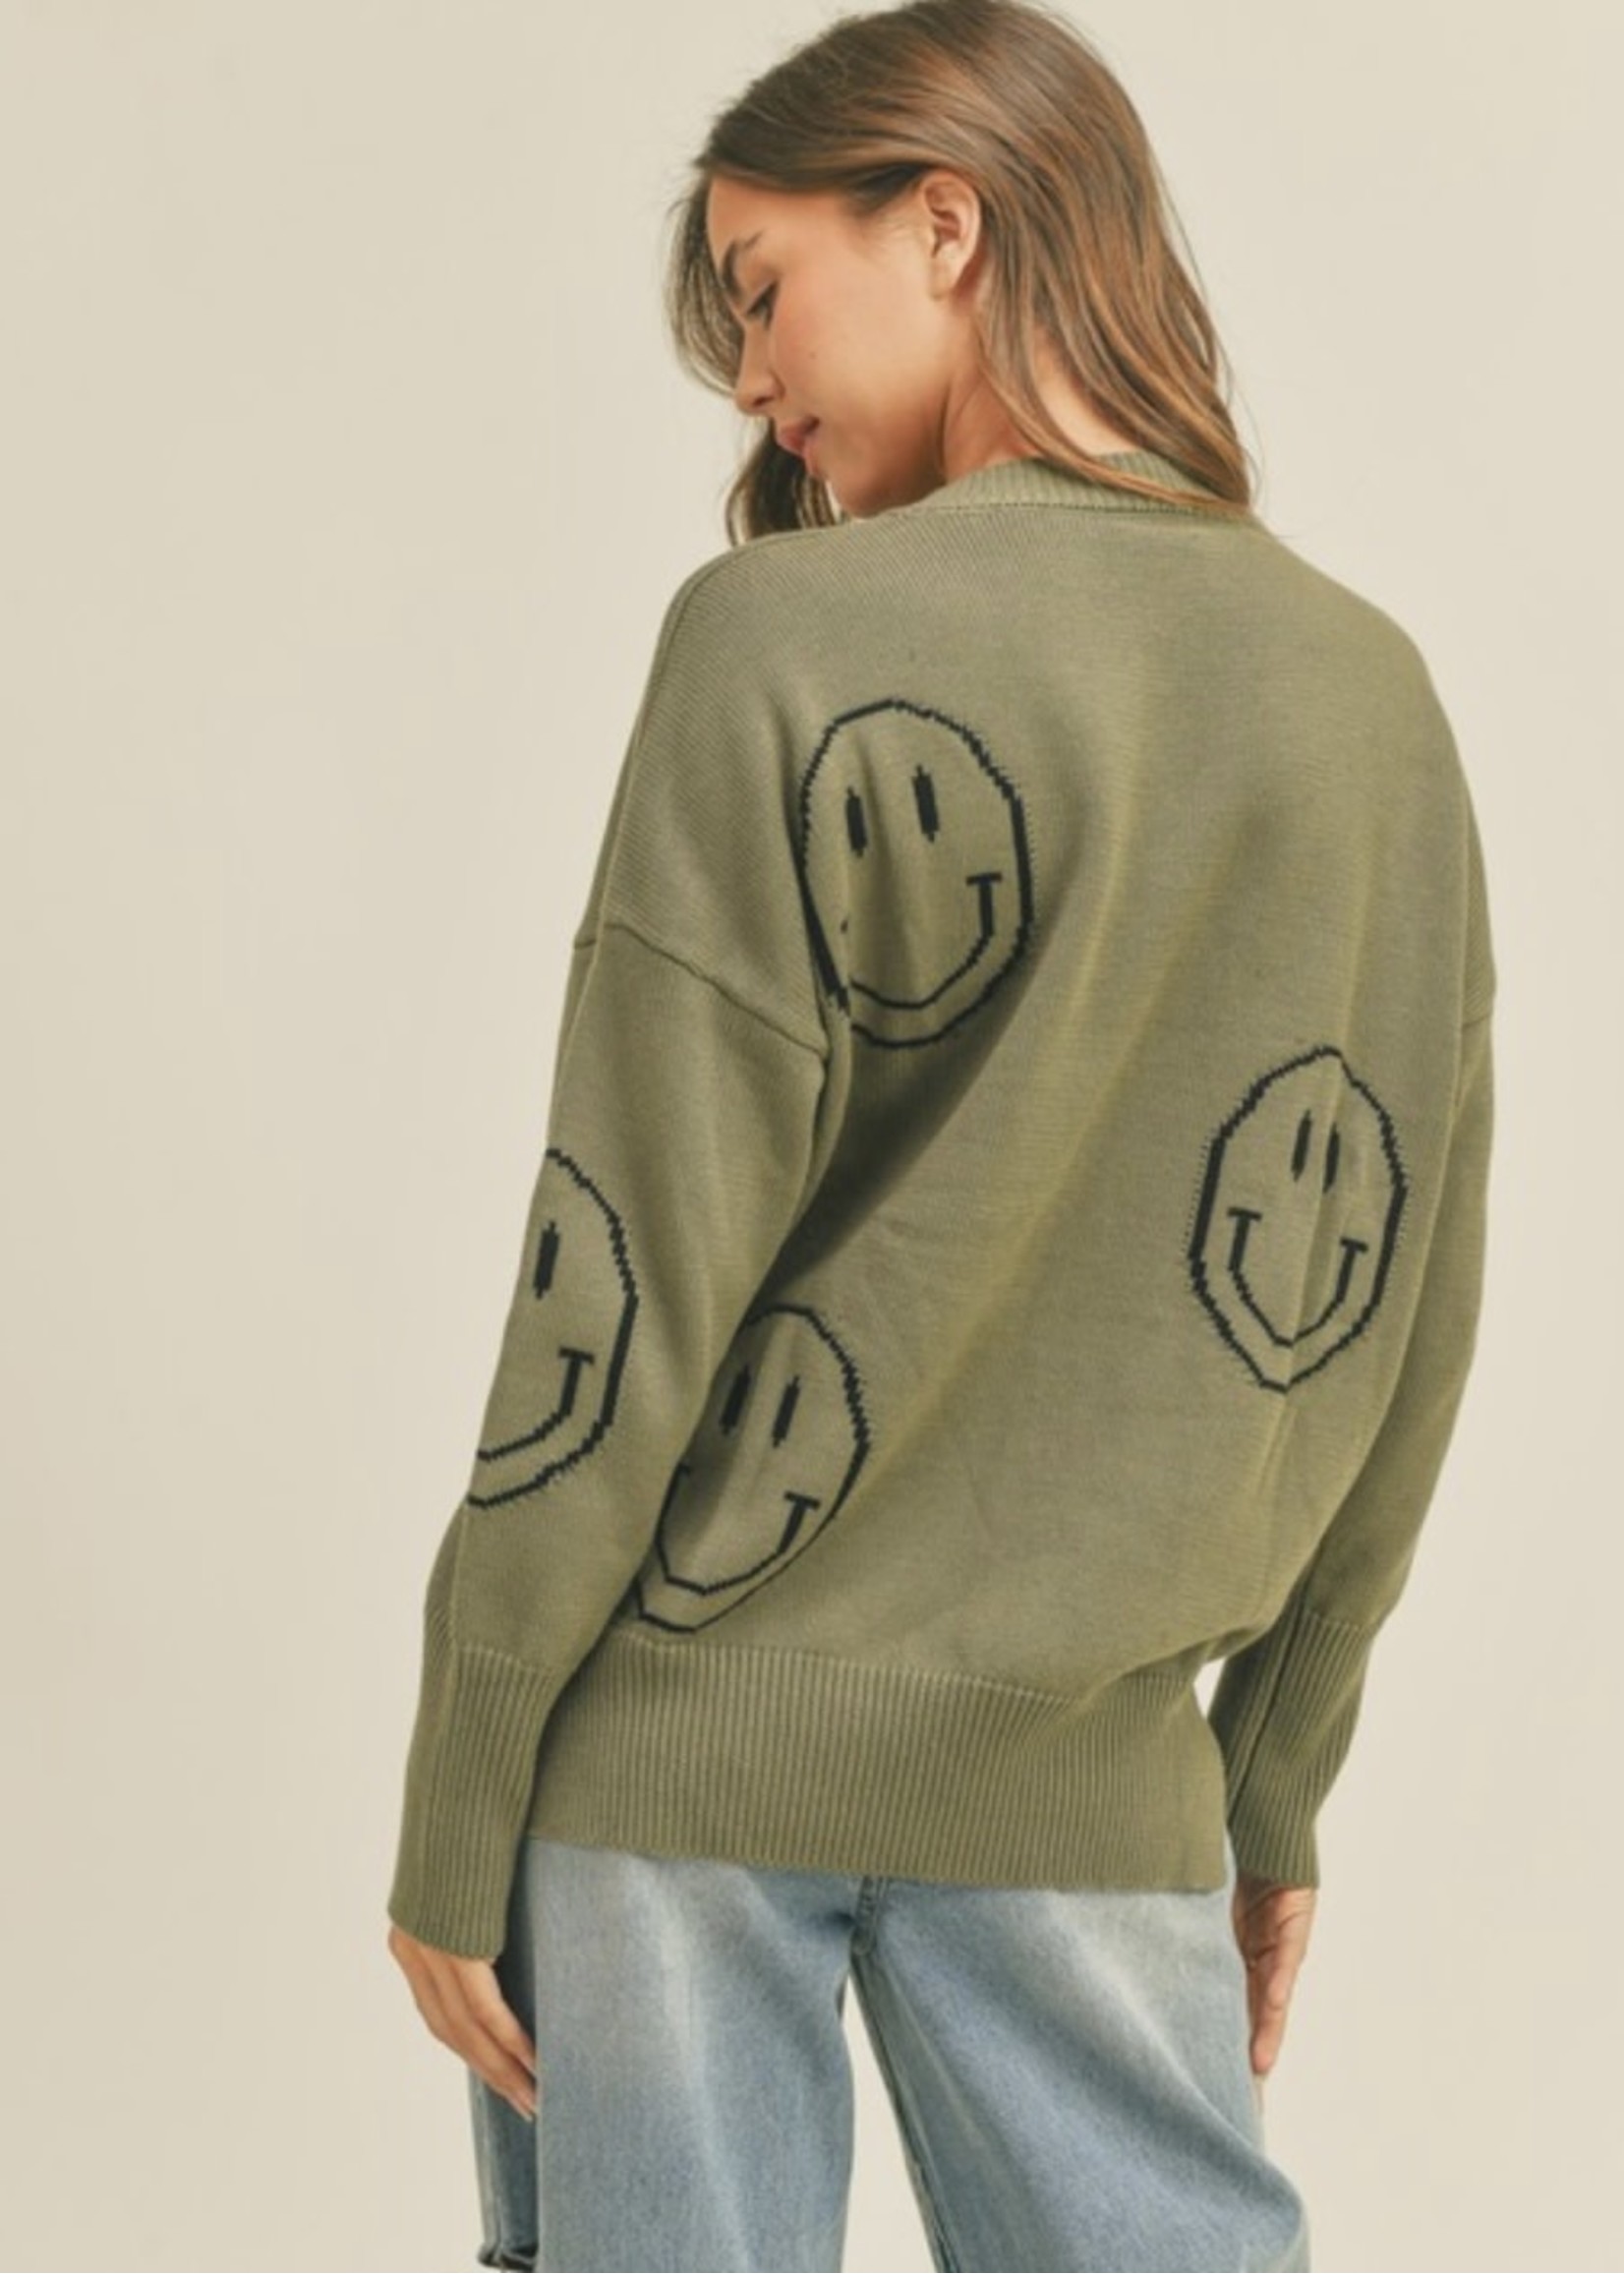 All Smiles Sweater